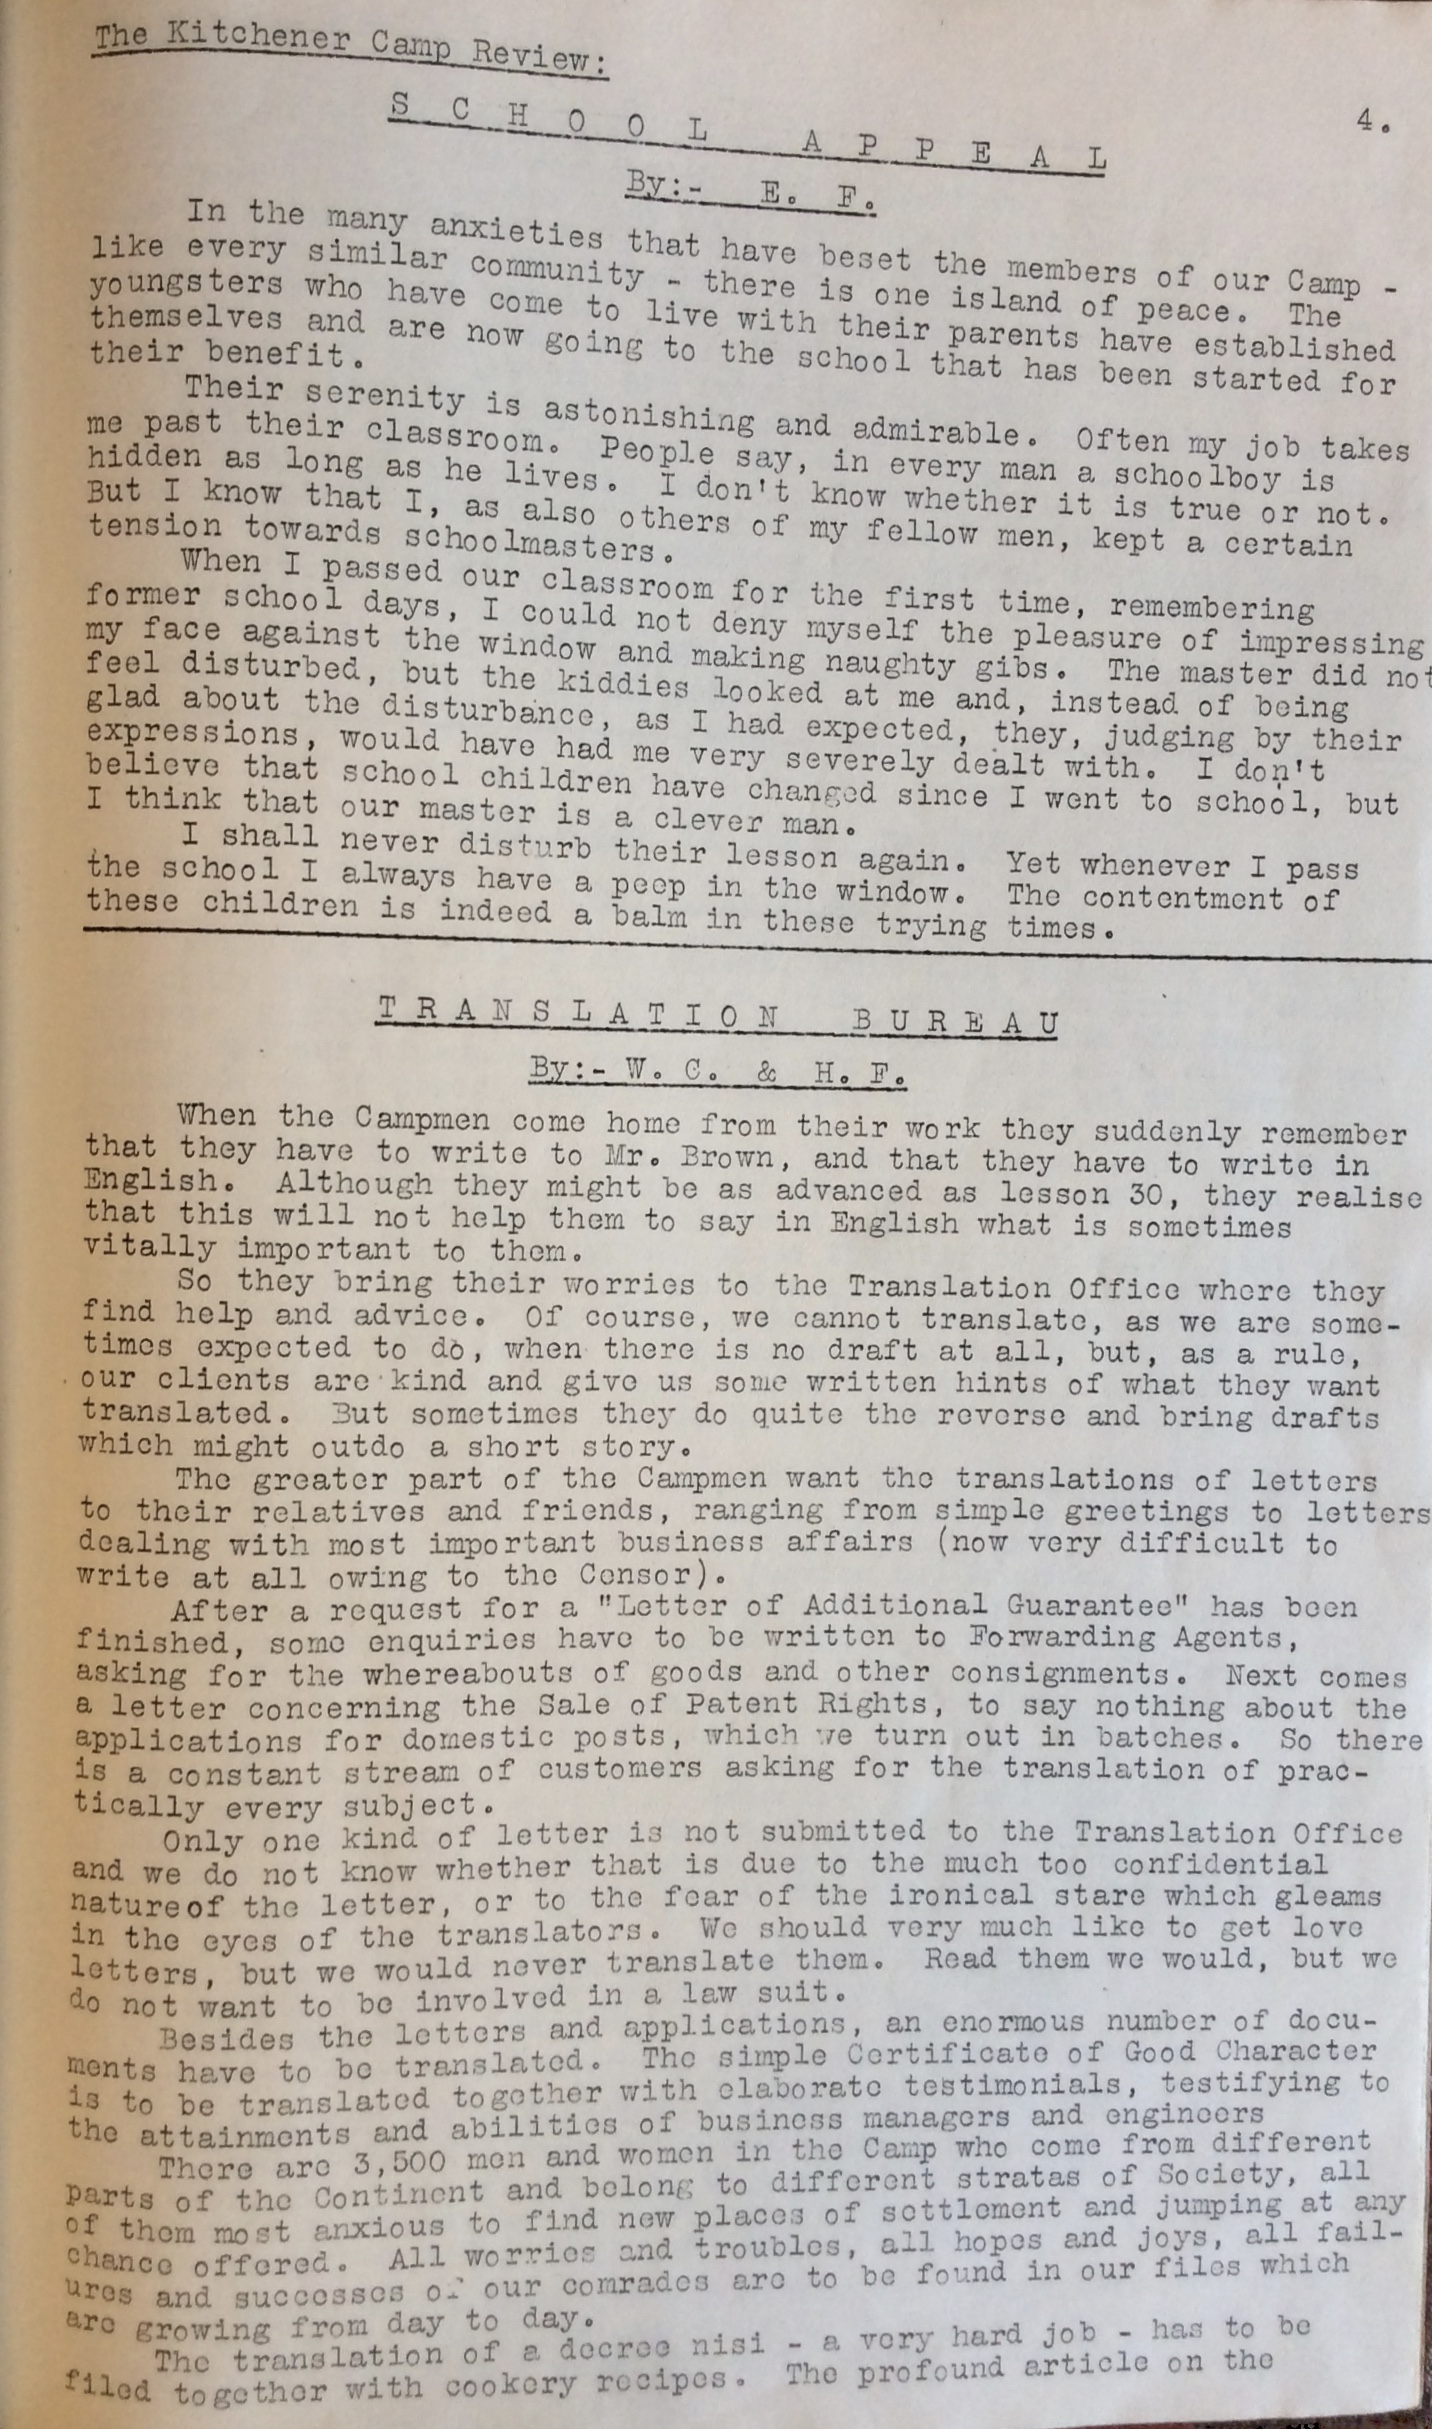 Kitchener Camp Review, October 1939, page 4